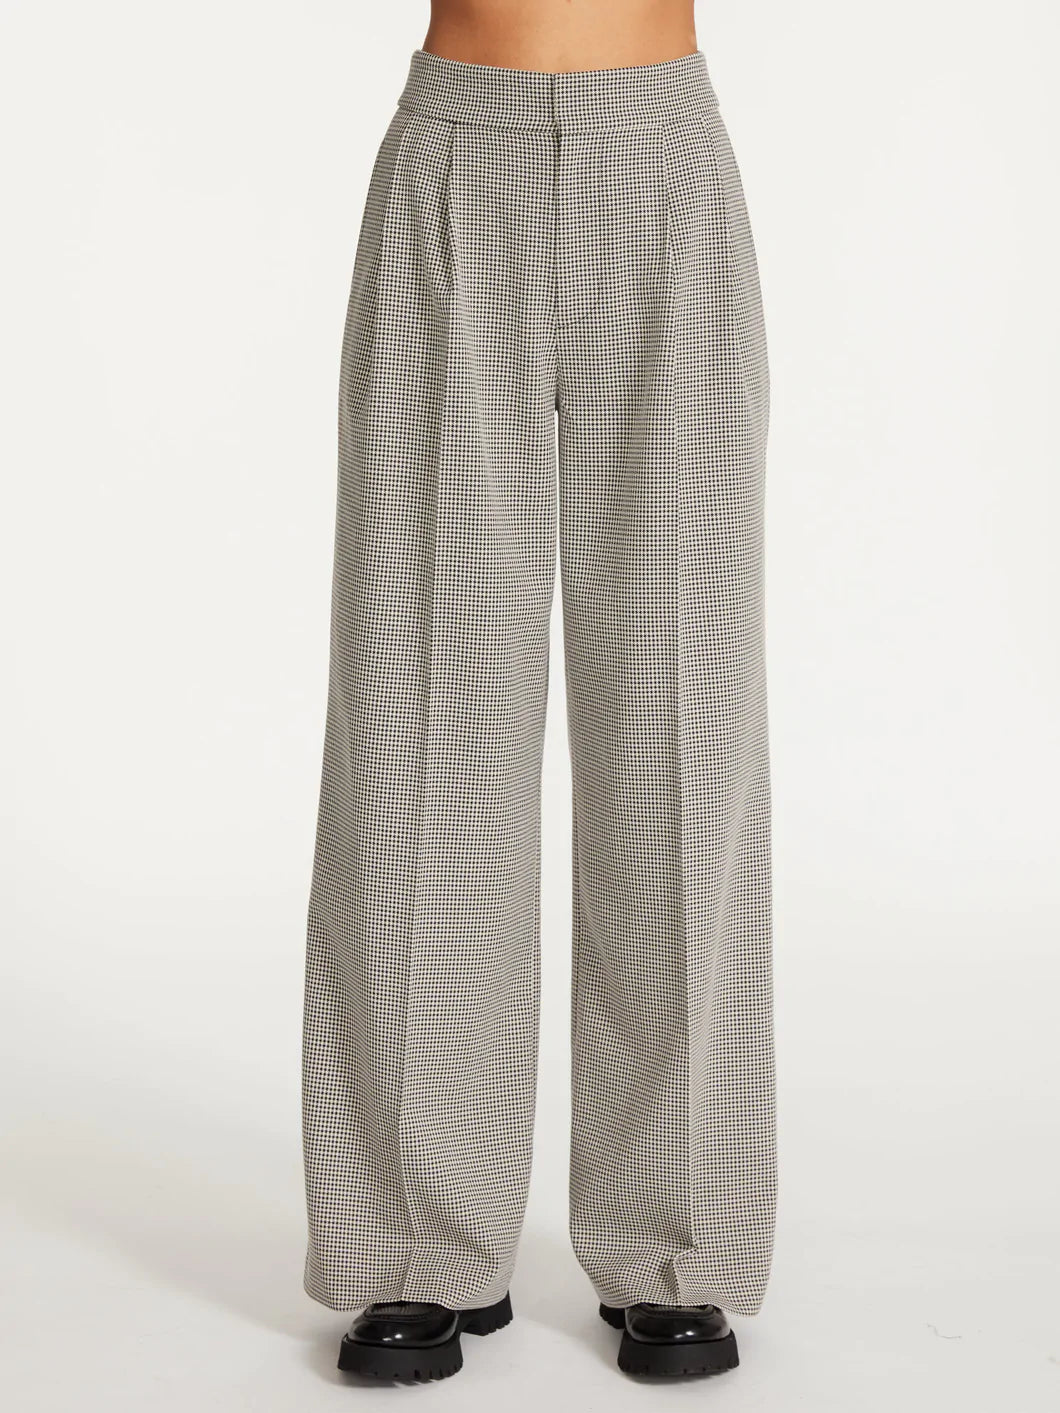 Isabella Houndstooth Pant